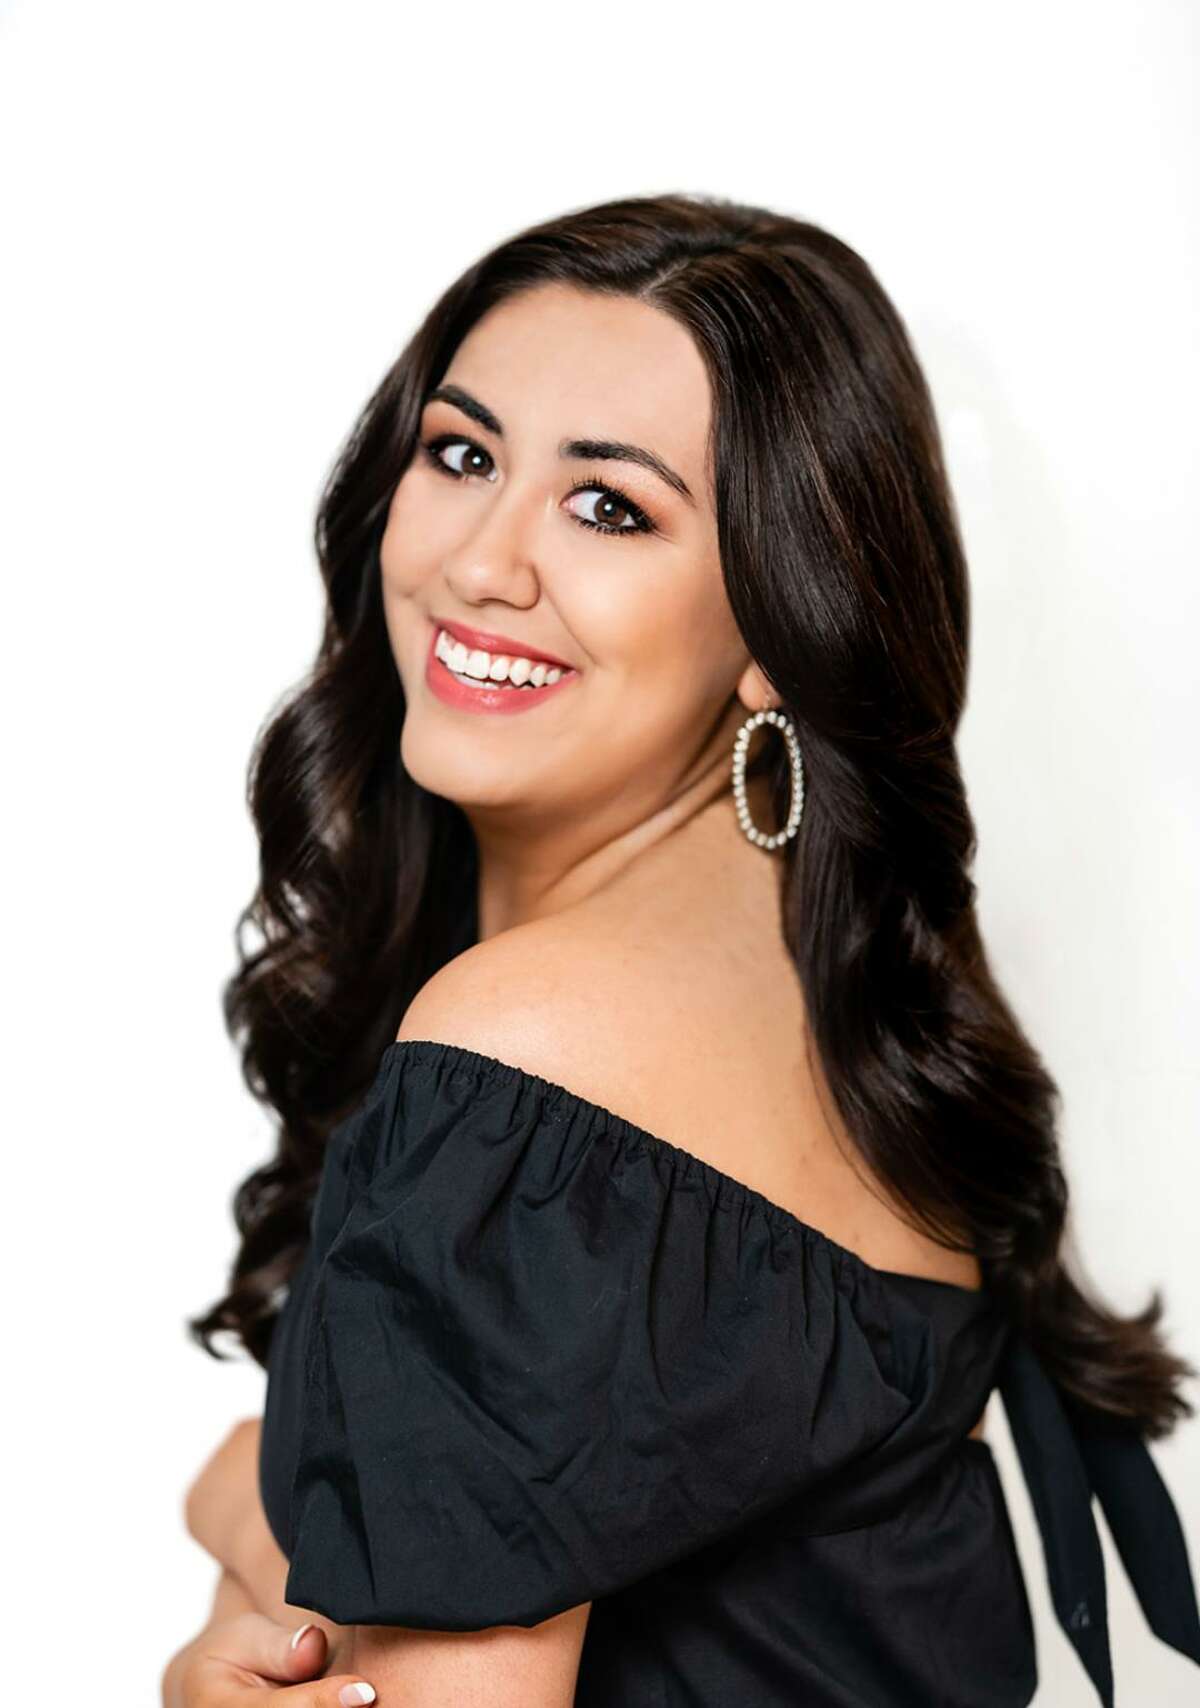 Meaghan Co of Deer Park has qualified for next summer’s Miss Texas Scholarship competition, whose winner will represent the Lone Star State at Miss America. Co advances after winning the Miss Southeast Texas competition, staged Oct. 2 at Atascocita High School.